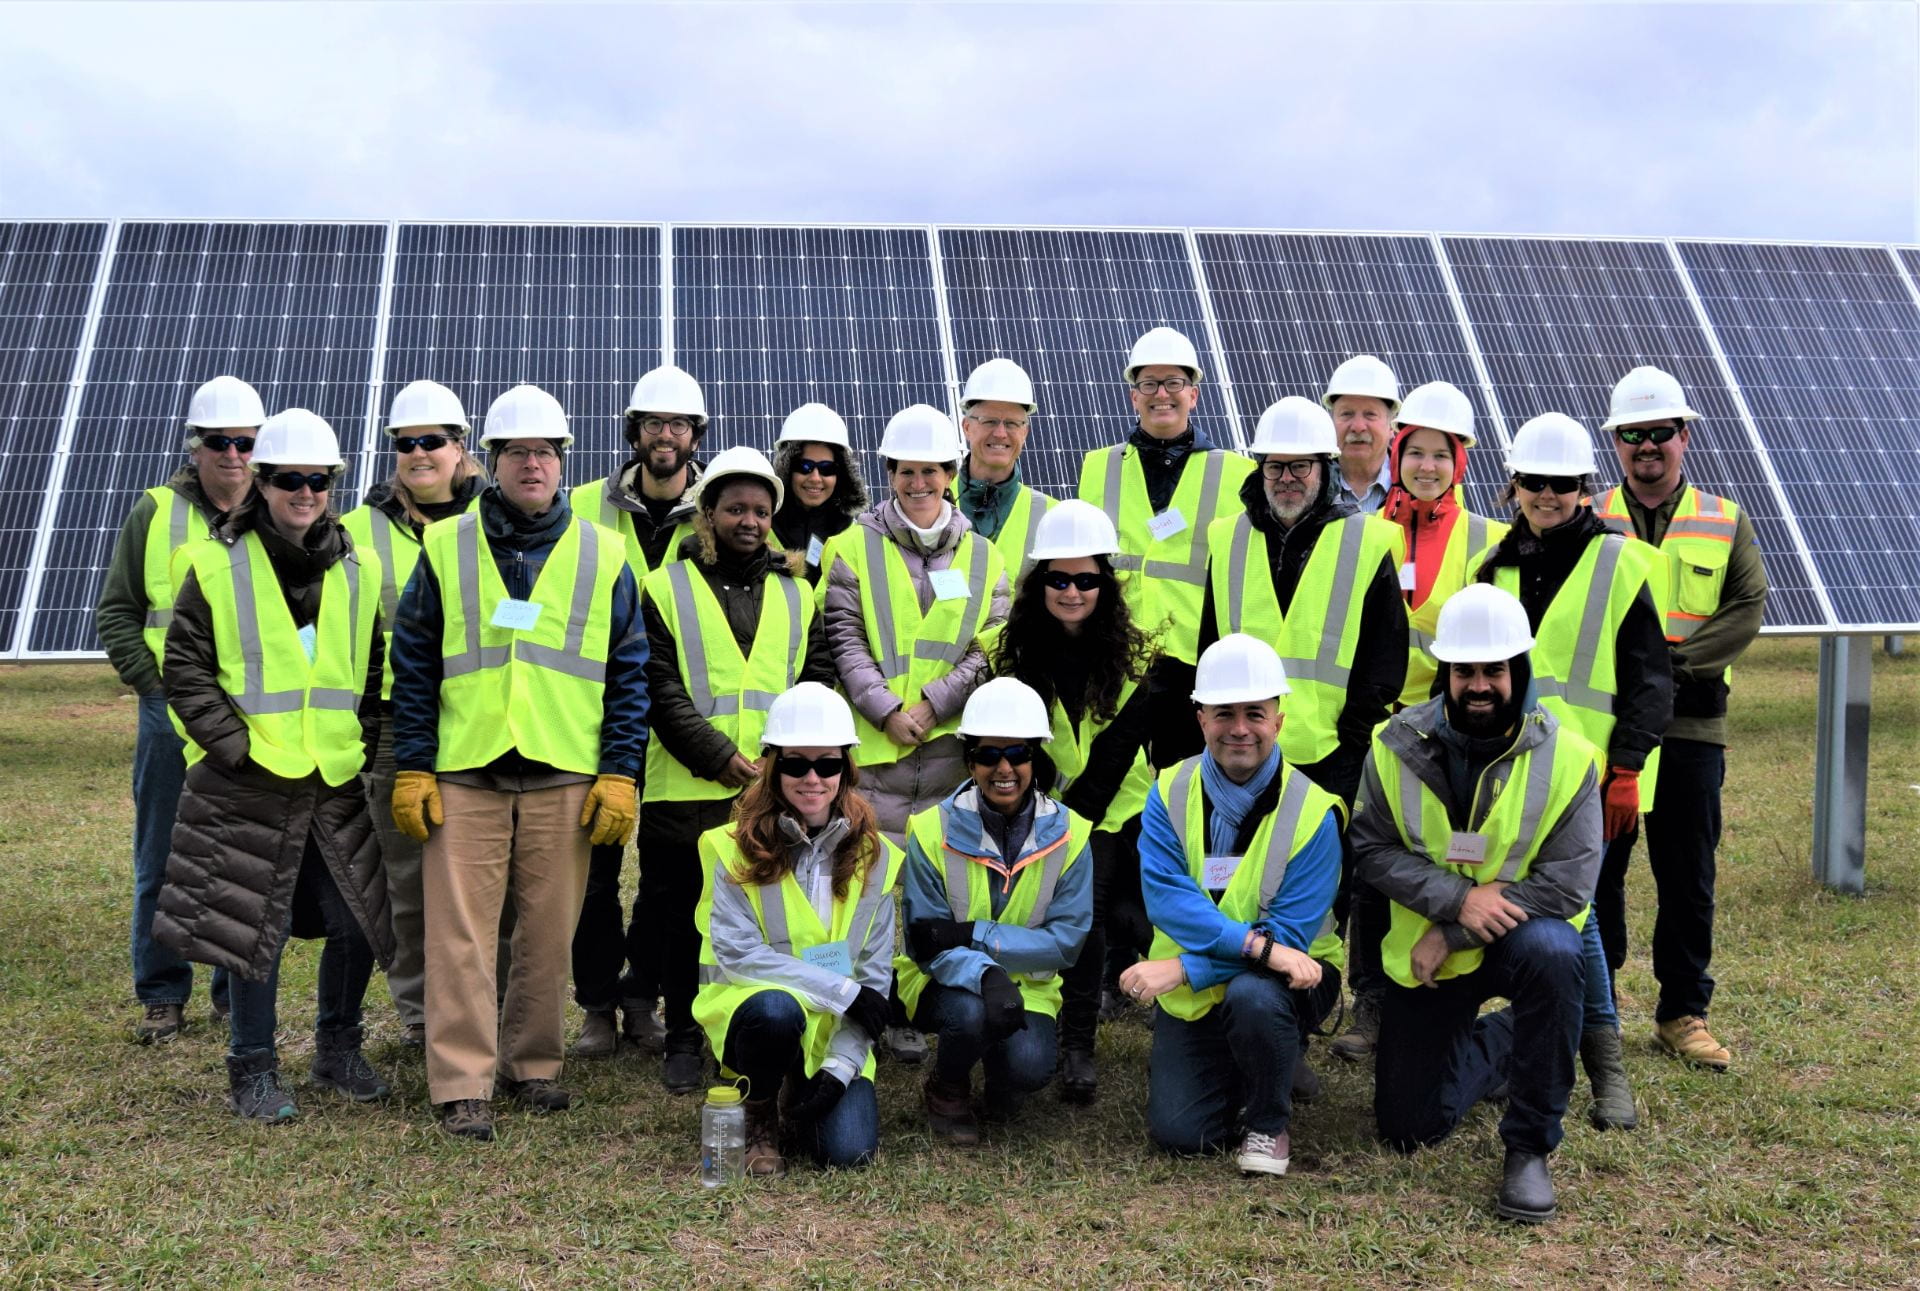 LandscapeU Students and Faculty in front of solar array in Franklin County Pa